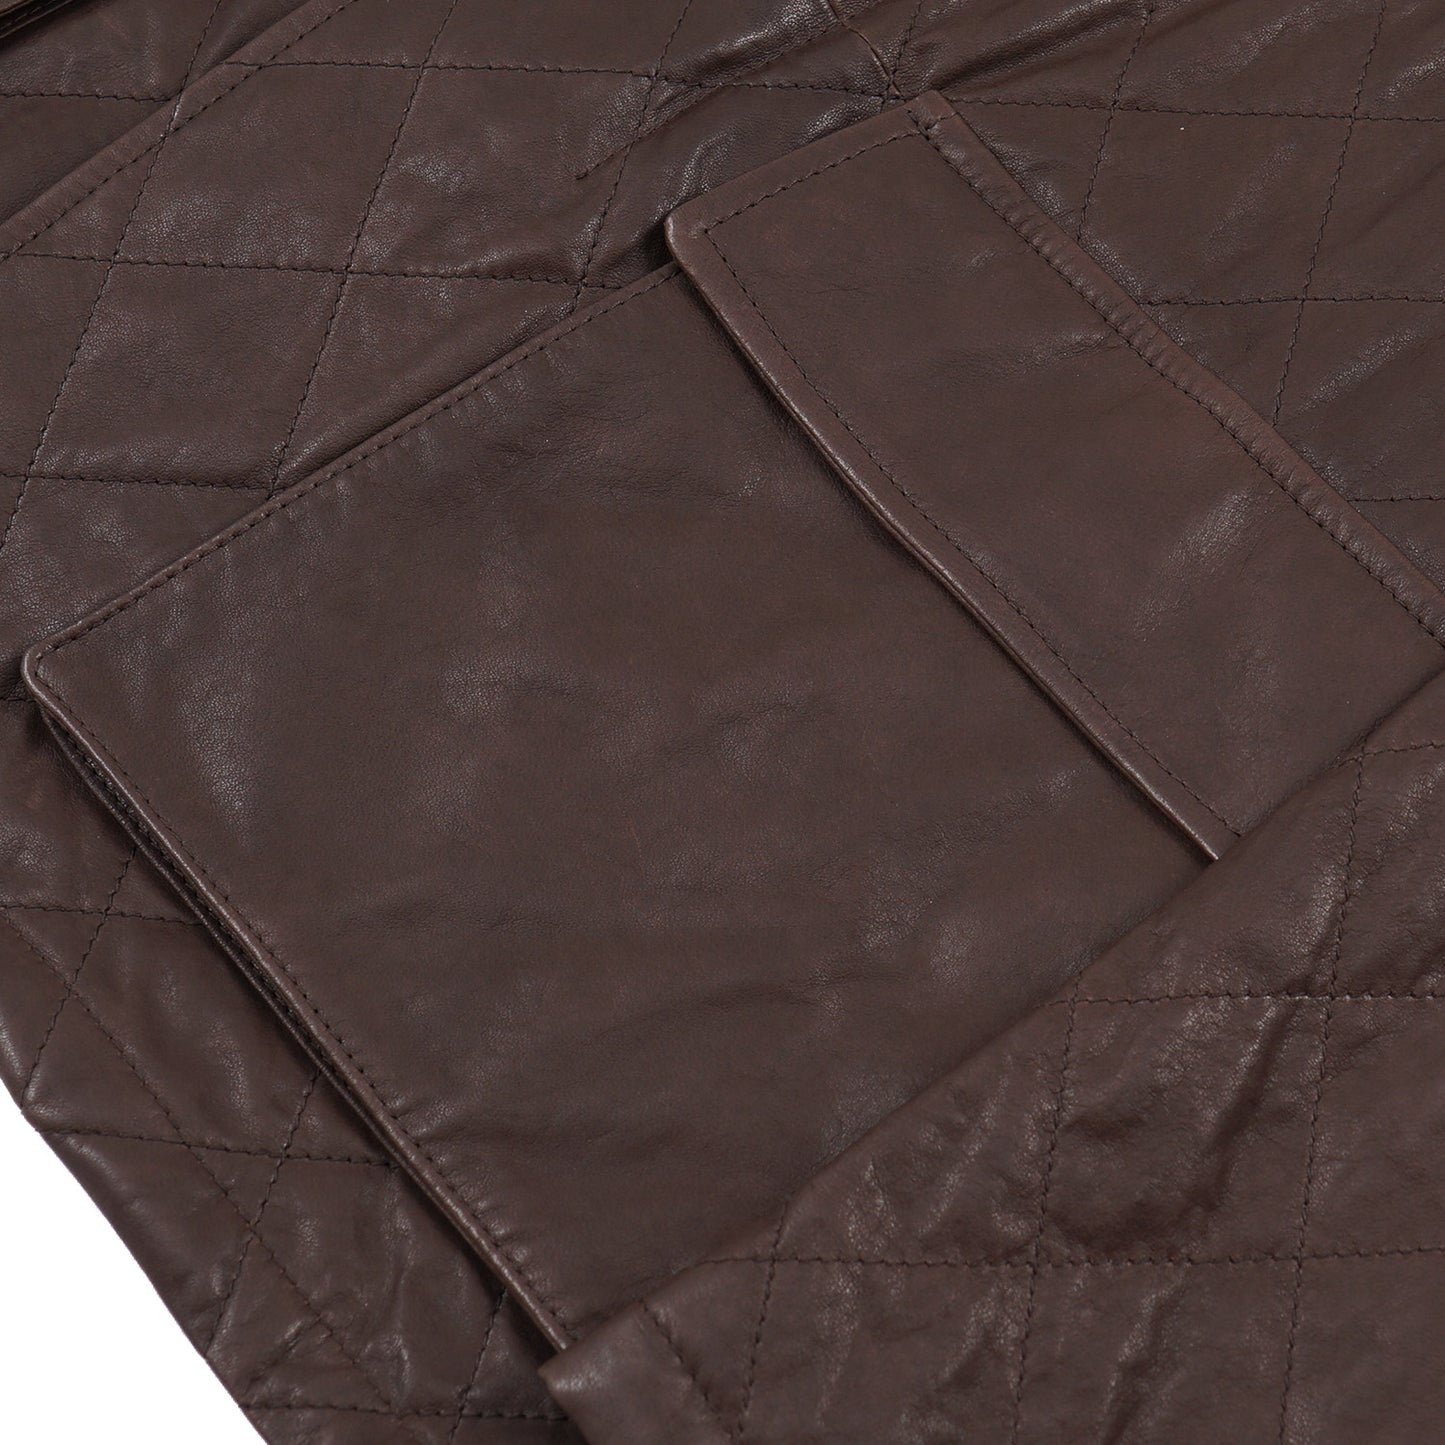 Kiton Quilted Lambskin Leather Jacket - Top Shelf Apparel